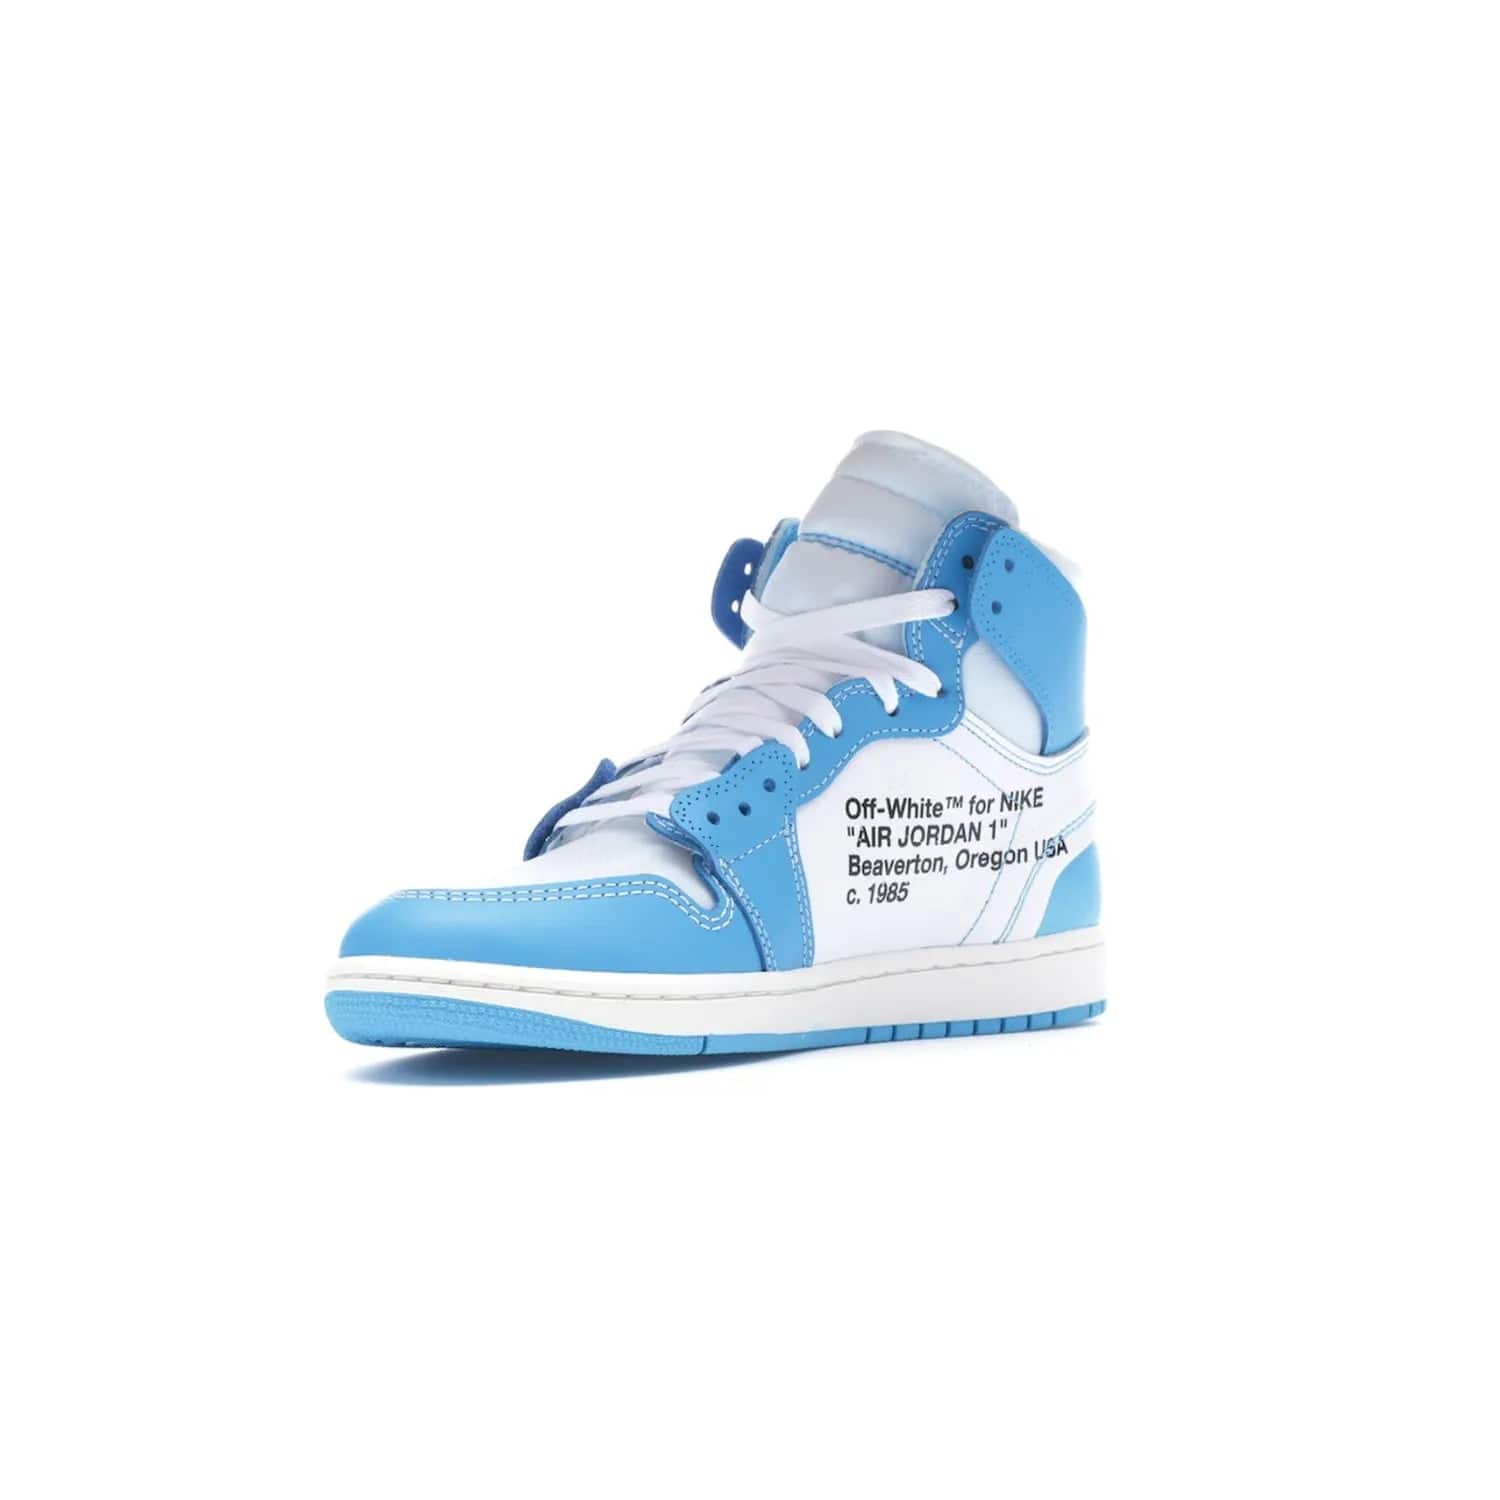 Jordan 1 Retro High Off-White University Blue - Image 15 - Only at www.BallersClubKickz.com - Classic Jordan 1 Retro High "Off-White UNC" sneakers meld style and comfort. Boasting deconstructed white and blue leather, Off-White detailing, and a white, dark powder blue and cone colorway, these sneakers are perfect for dressing up or down. Get the iconic Off-White Jordan 1's and upgrade your look.